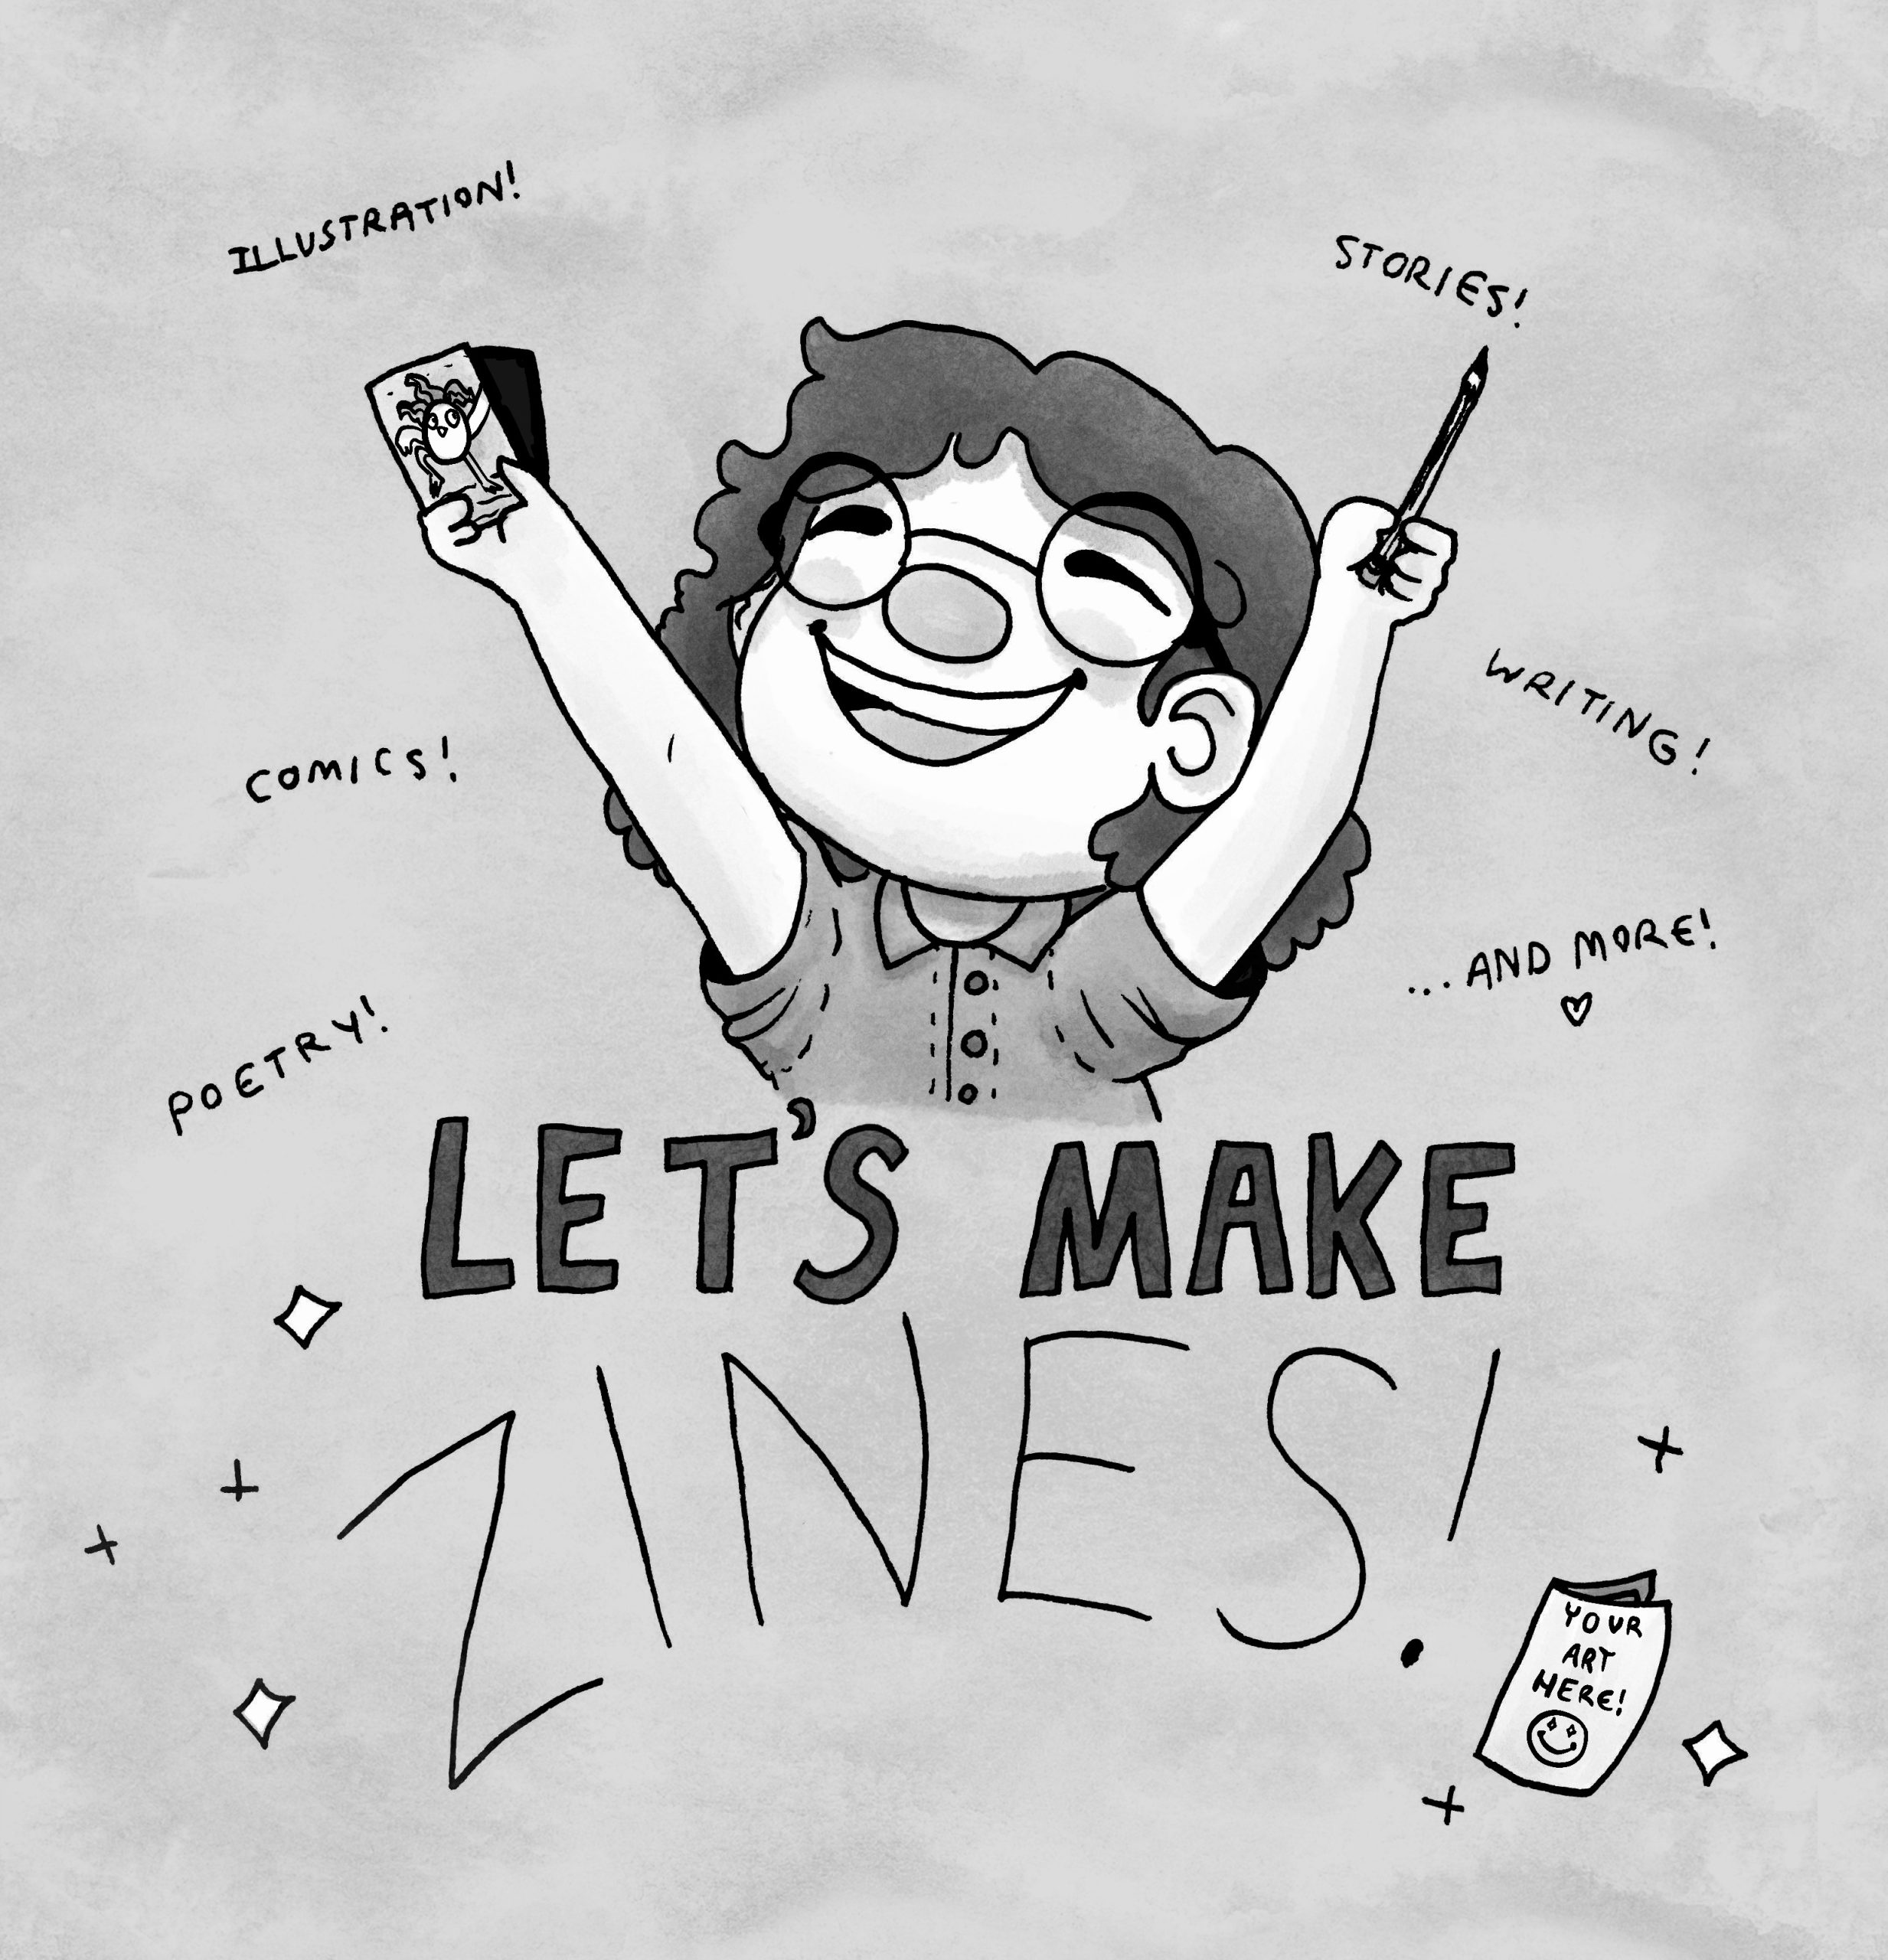 cute illustration of a person excitedly announcing 'let's make zines!'